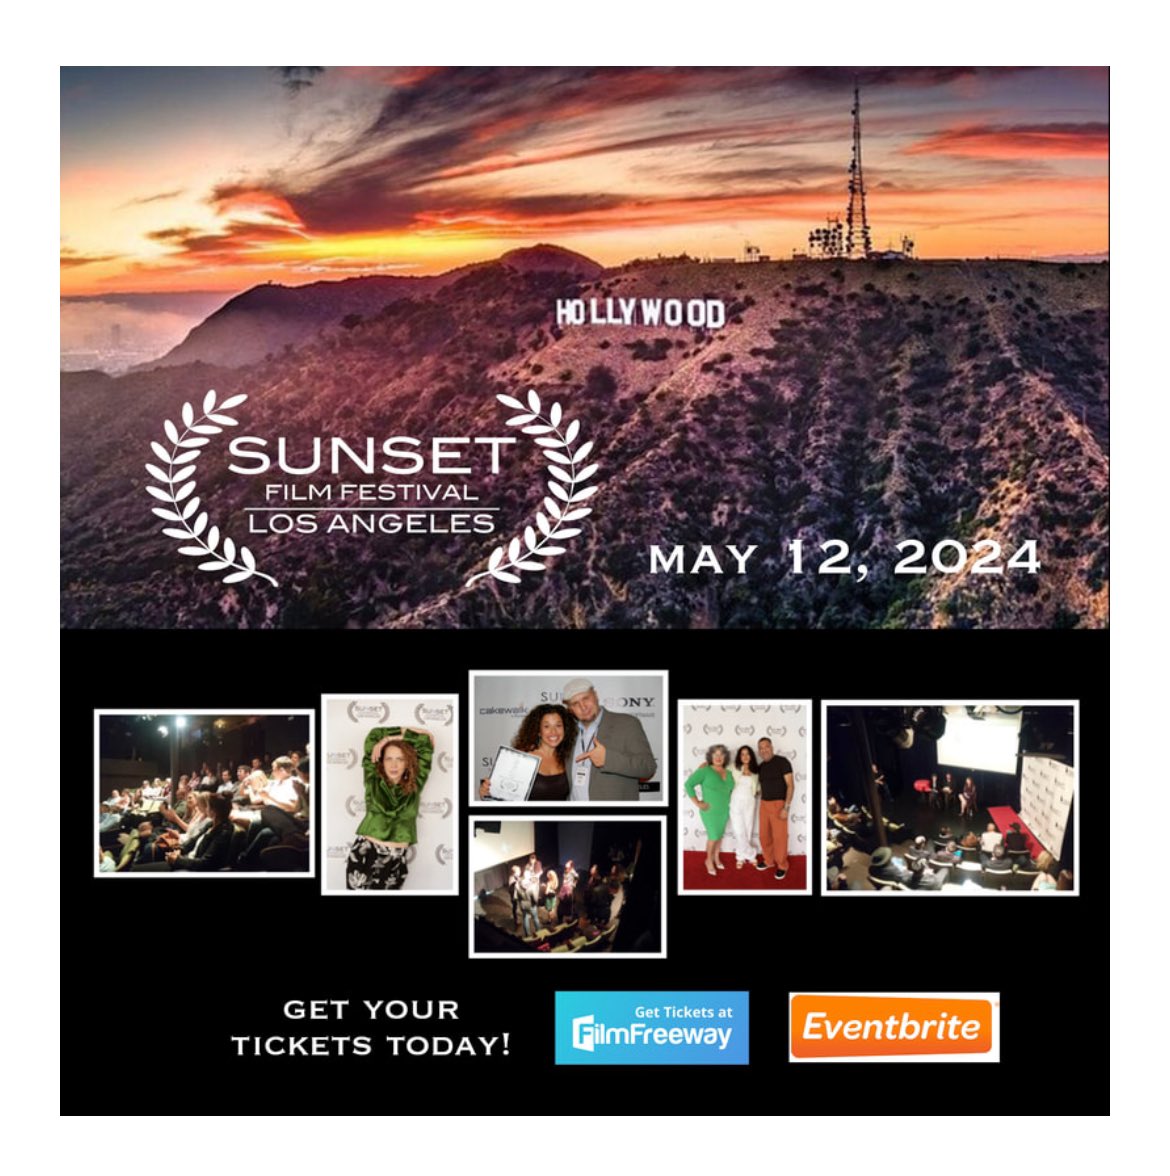 Delighted that our ‘What matters most?’ Film is being screened at the #SunsetFilmFestival in LA. Sadly I can’t be there but it is wonderful that it is reaching such a wide range of audiences. It is also fitting that it coincides with #DyingMattersWeek.